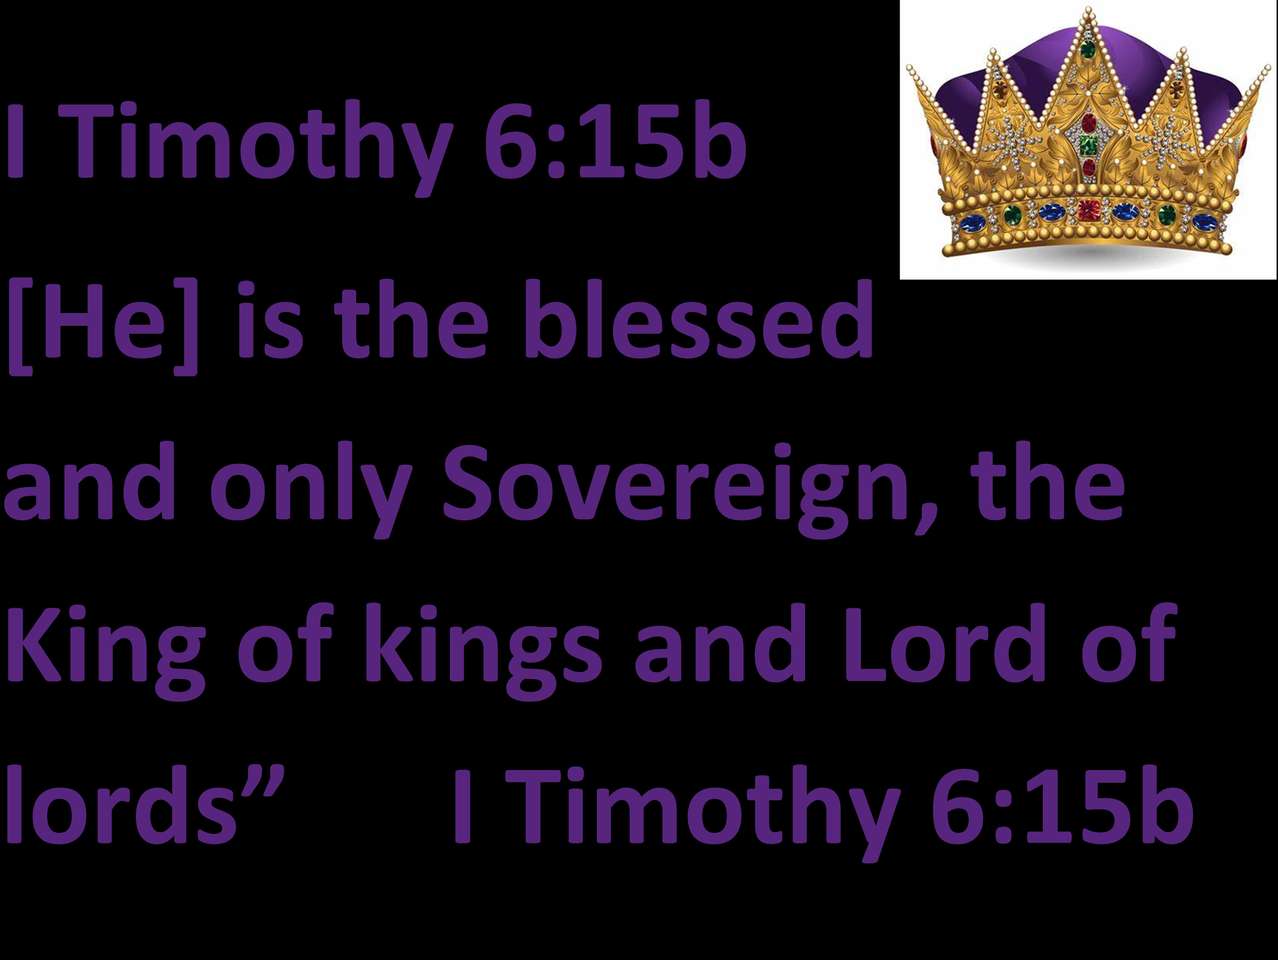 1 Timothy 6: 15b online puzzle